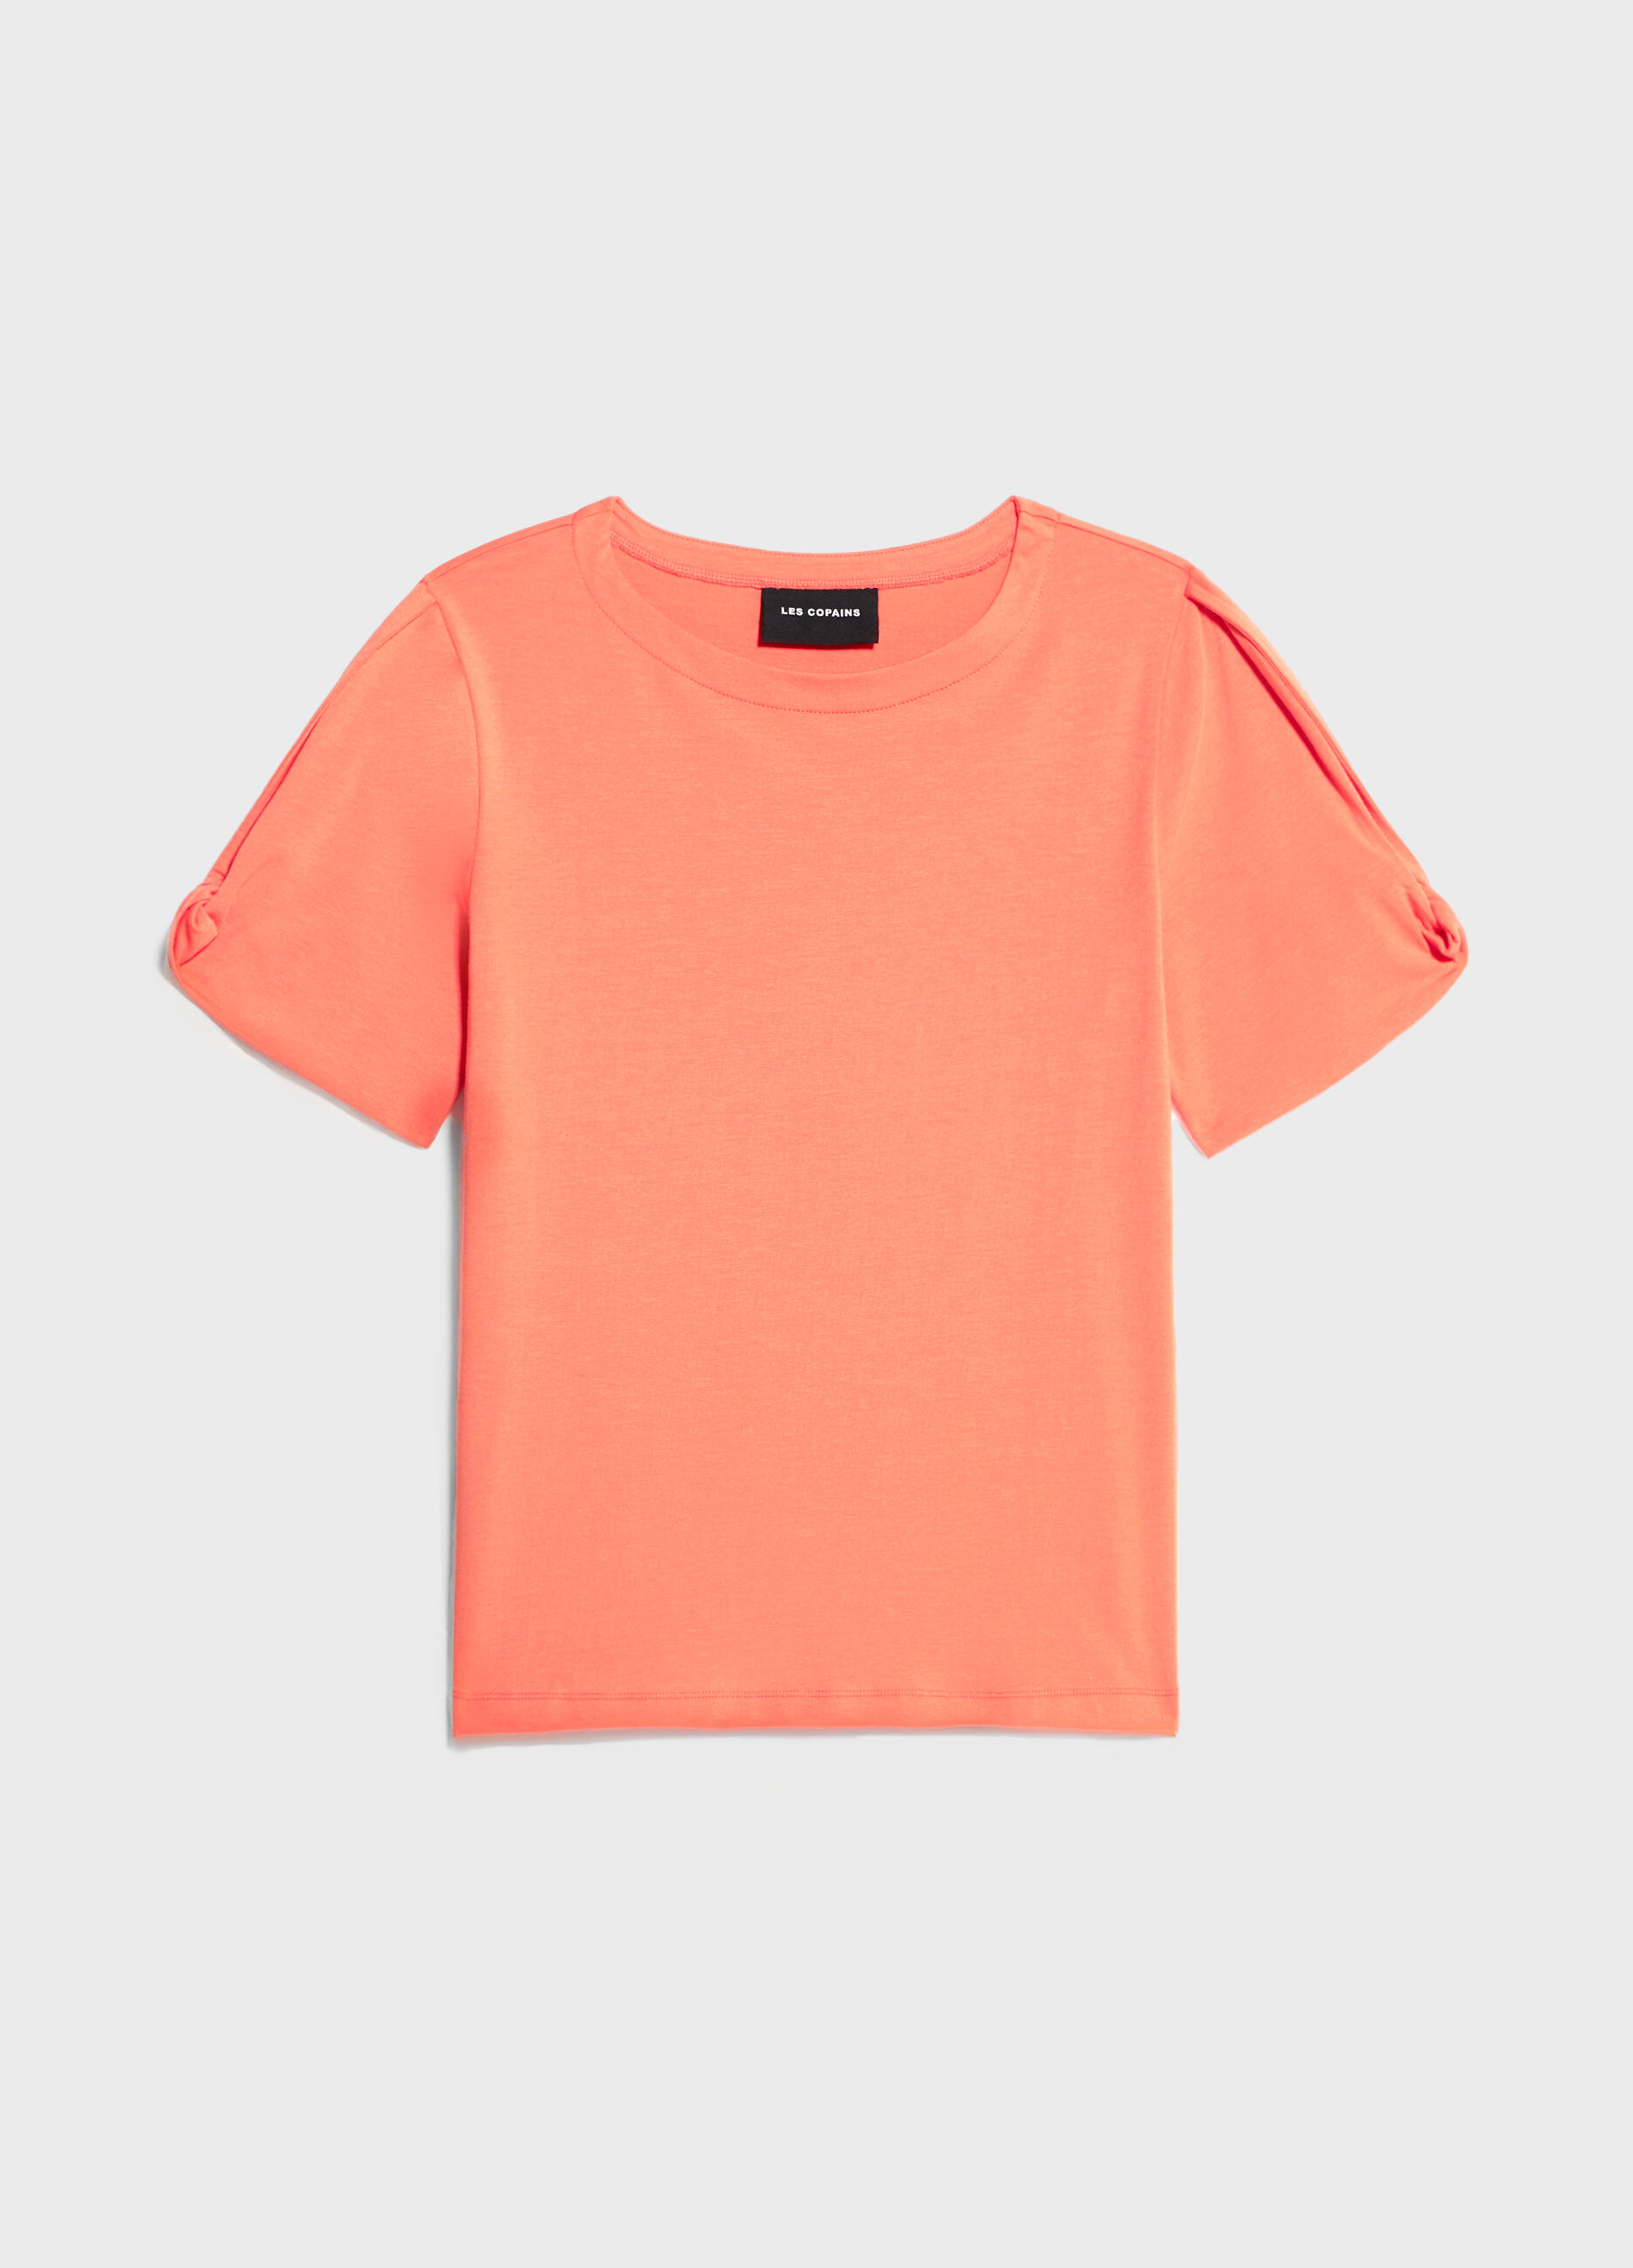 Cotton and modal T-shirt